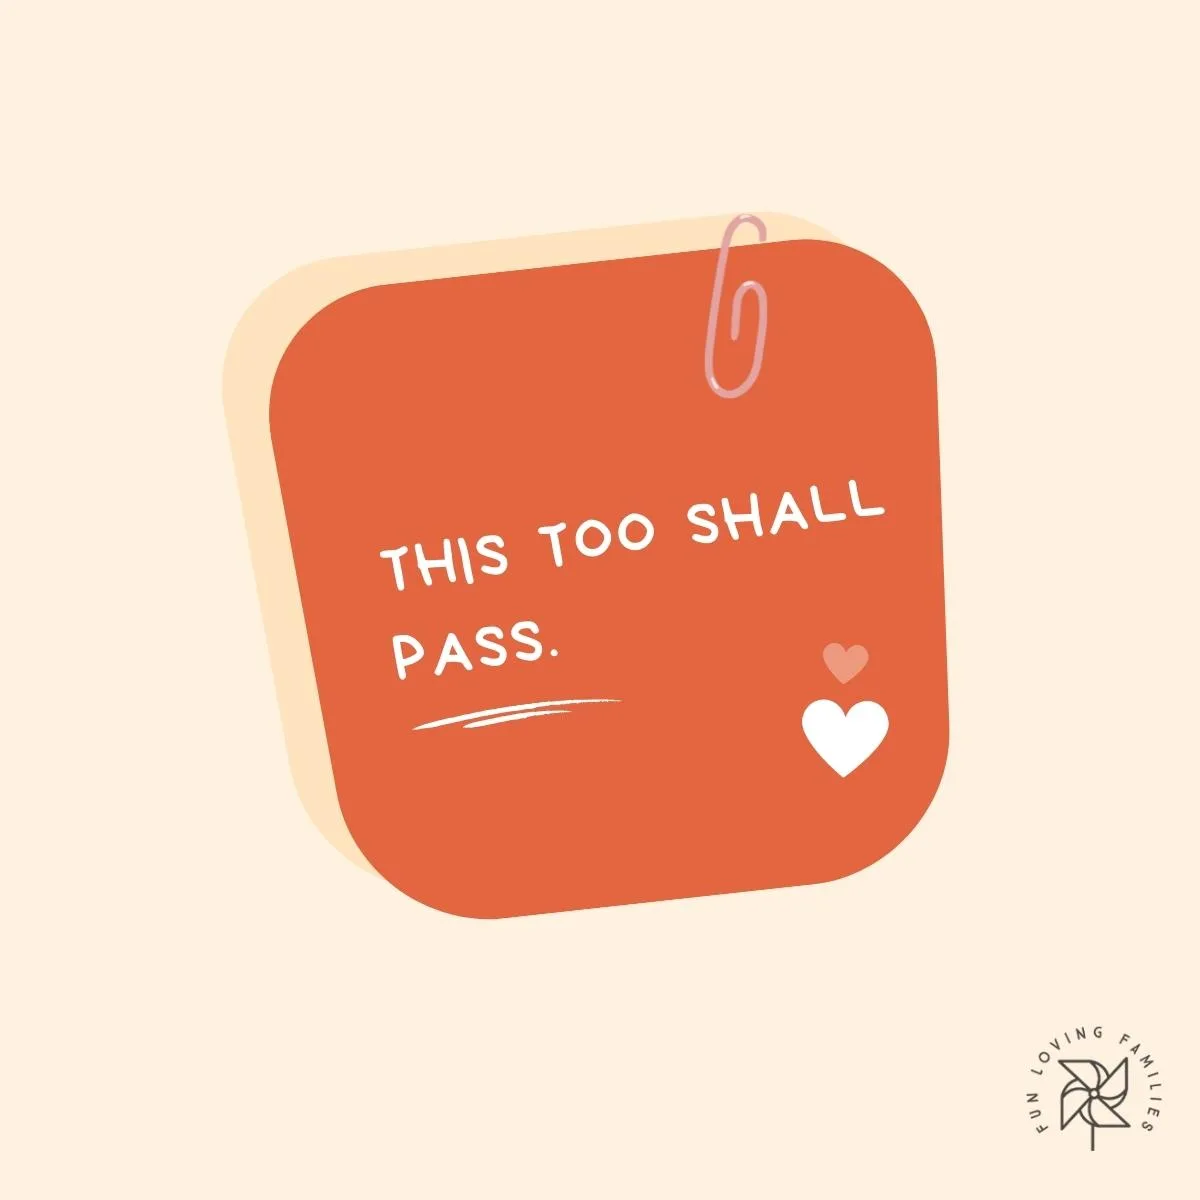 This too shall pass affirmation